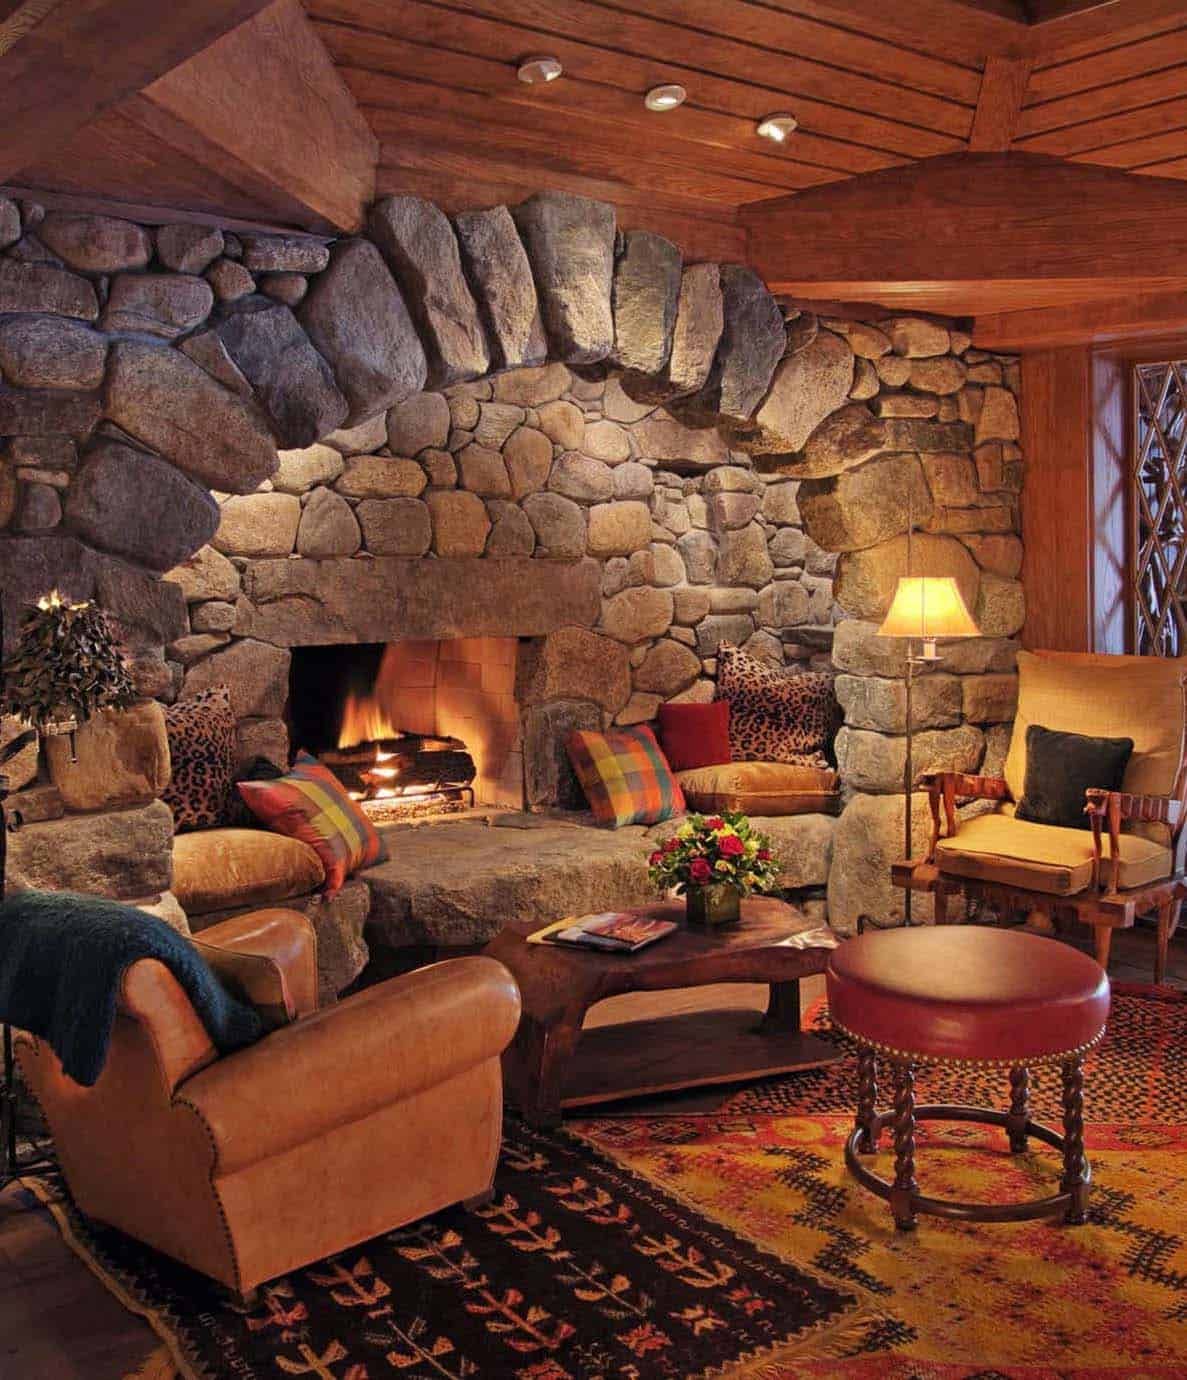 Rustic Fireplace Inspirational 28 Extremely Cozy Fireplace Reading Nooks for Curling Up In